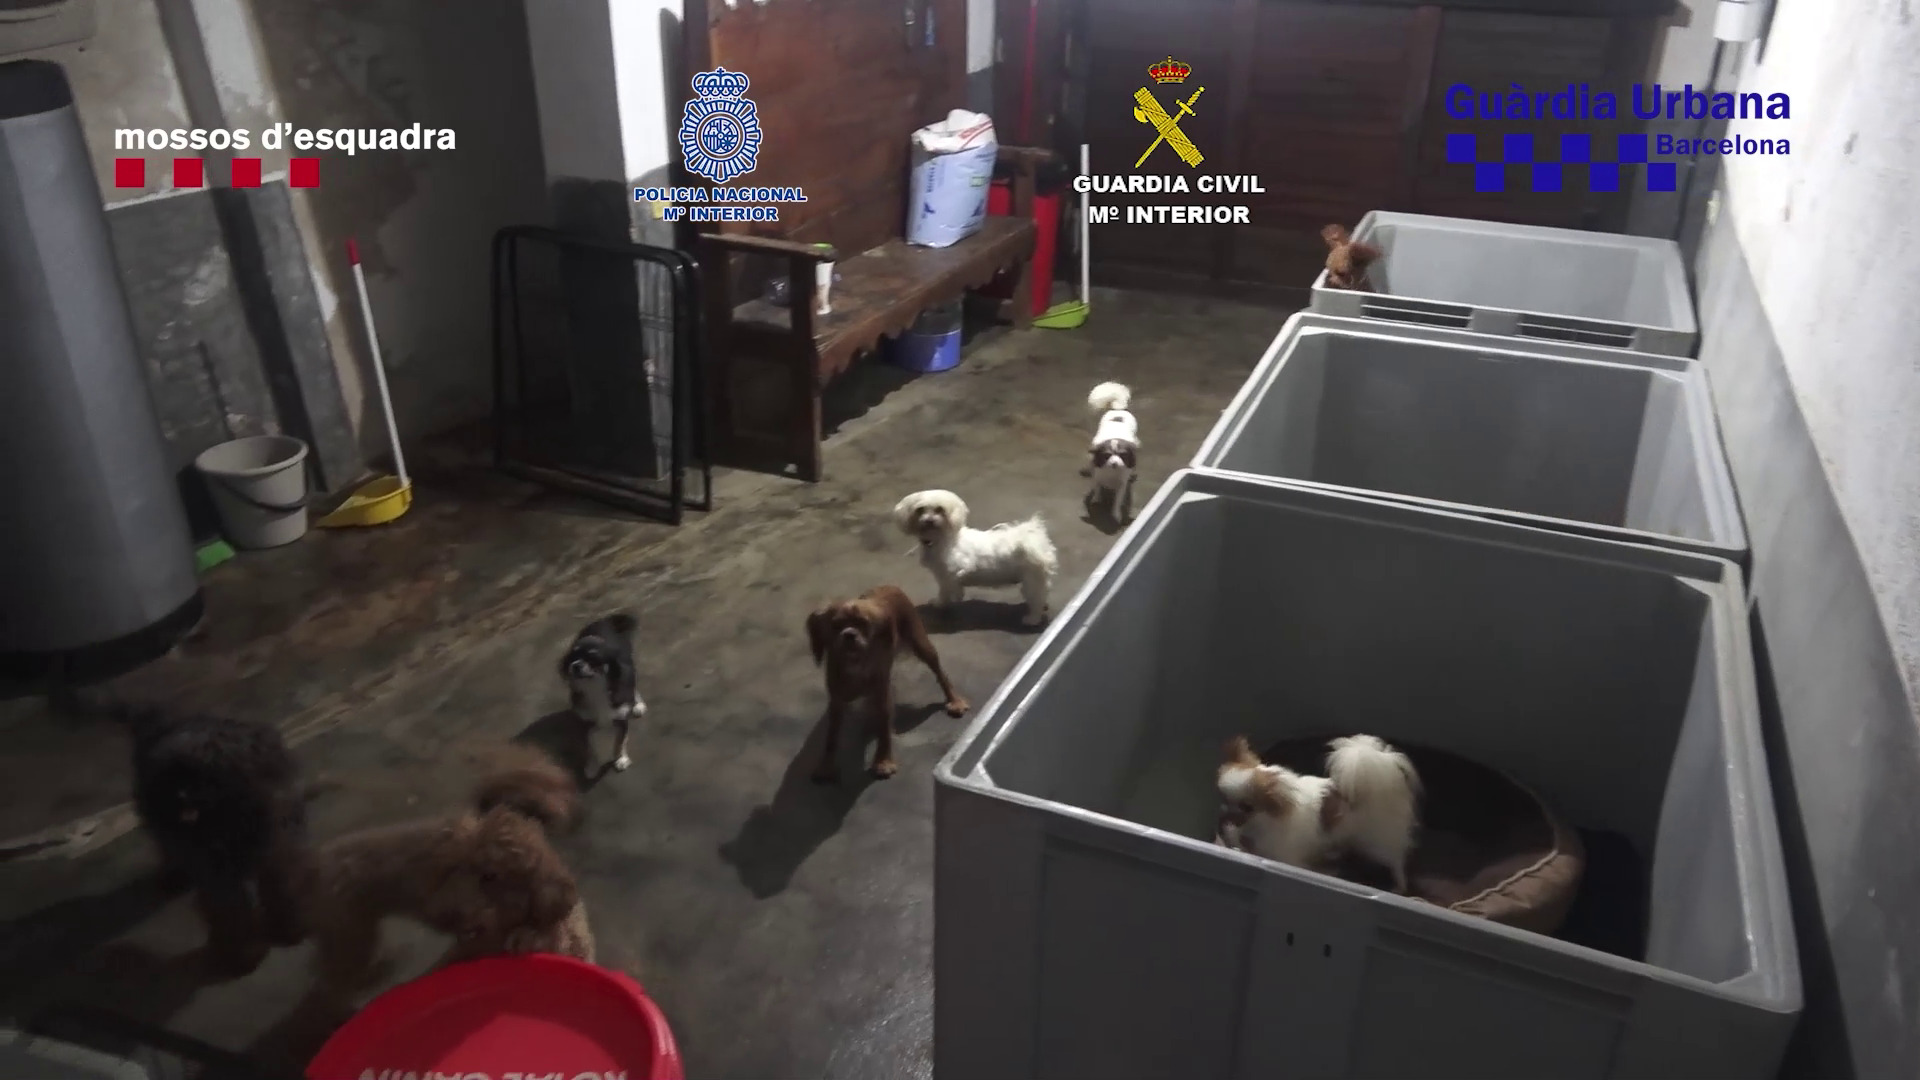 Some dogs inside a garage, rescued by police in a joint operation